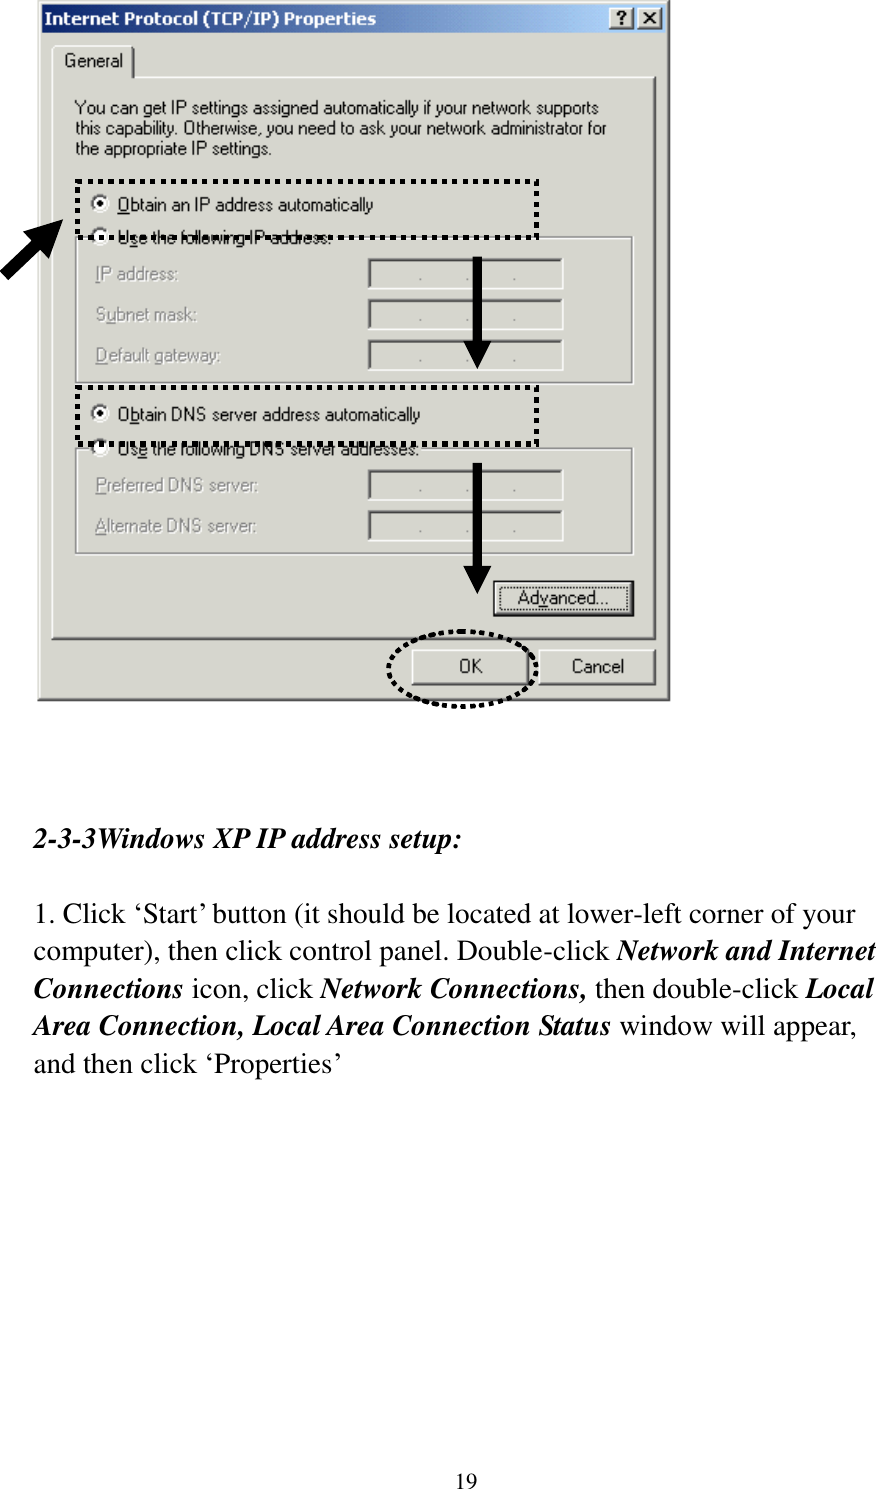 19     2-3-3Windows XP IP address setup:  1. Click „Start‟ button (it should be located at lower-left corner of your computer), then click control panel. Double-click Network and Internet Connections icon, click Network Connections, then double-click Local Area Connection, Local Area Connection Status window will appear, and then click „Properties‟  